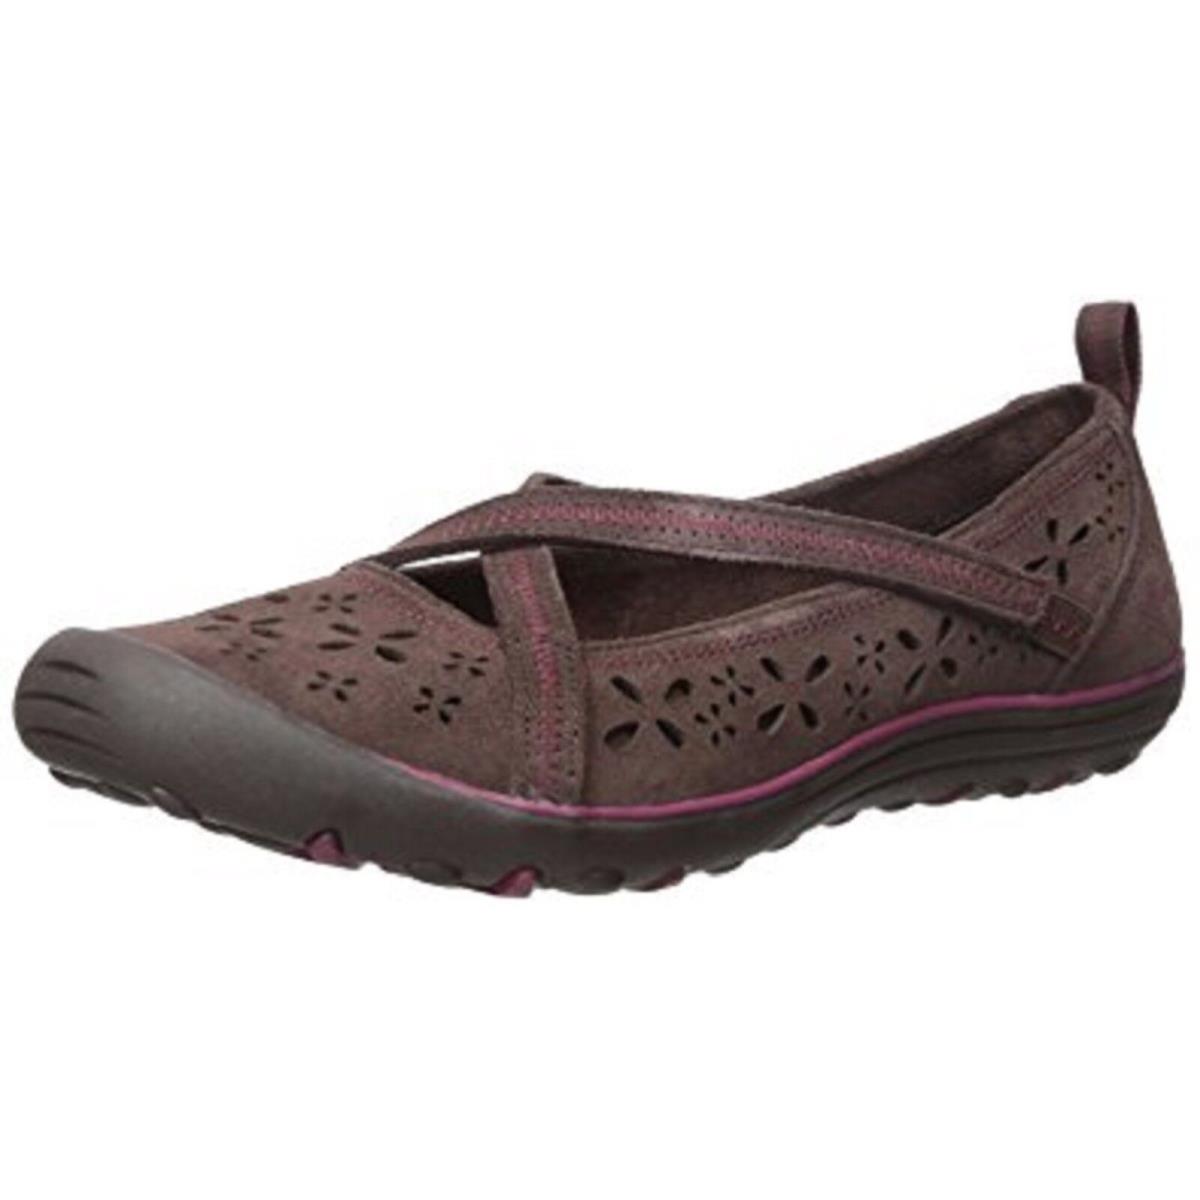 Skechers Women`s Earth Fest Sustainability Casual Shoes Brown 7 M